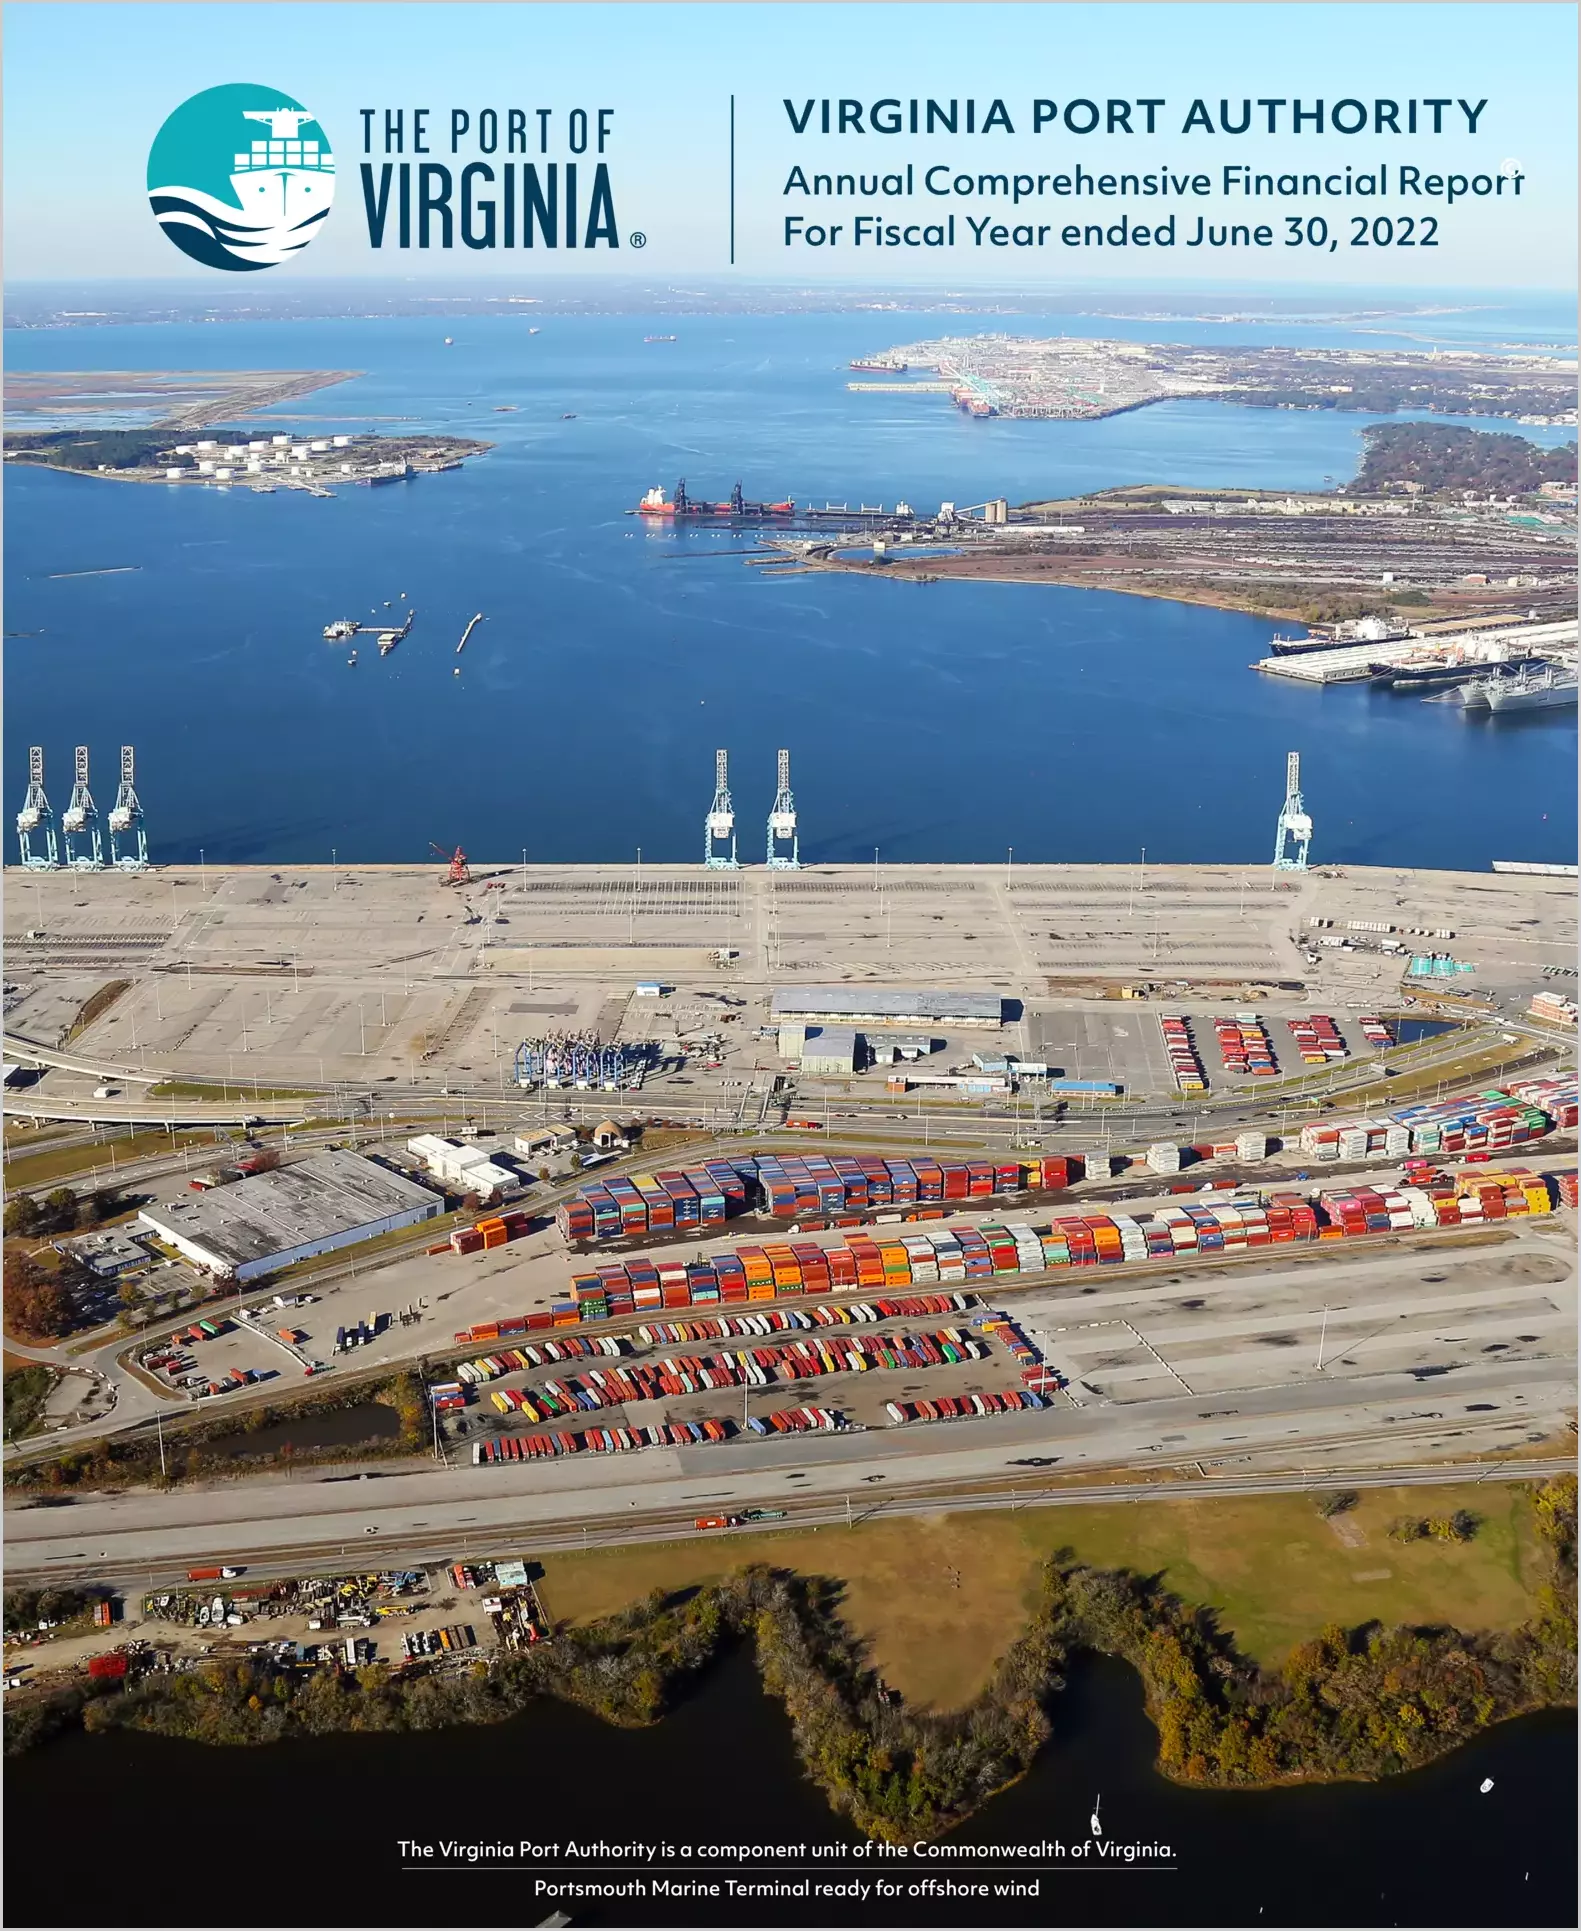 Virginia Port Authority Financial Statements for the year ended June 30, 2022